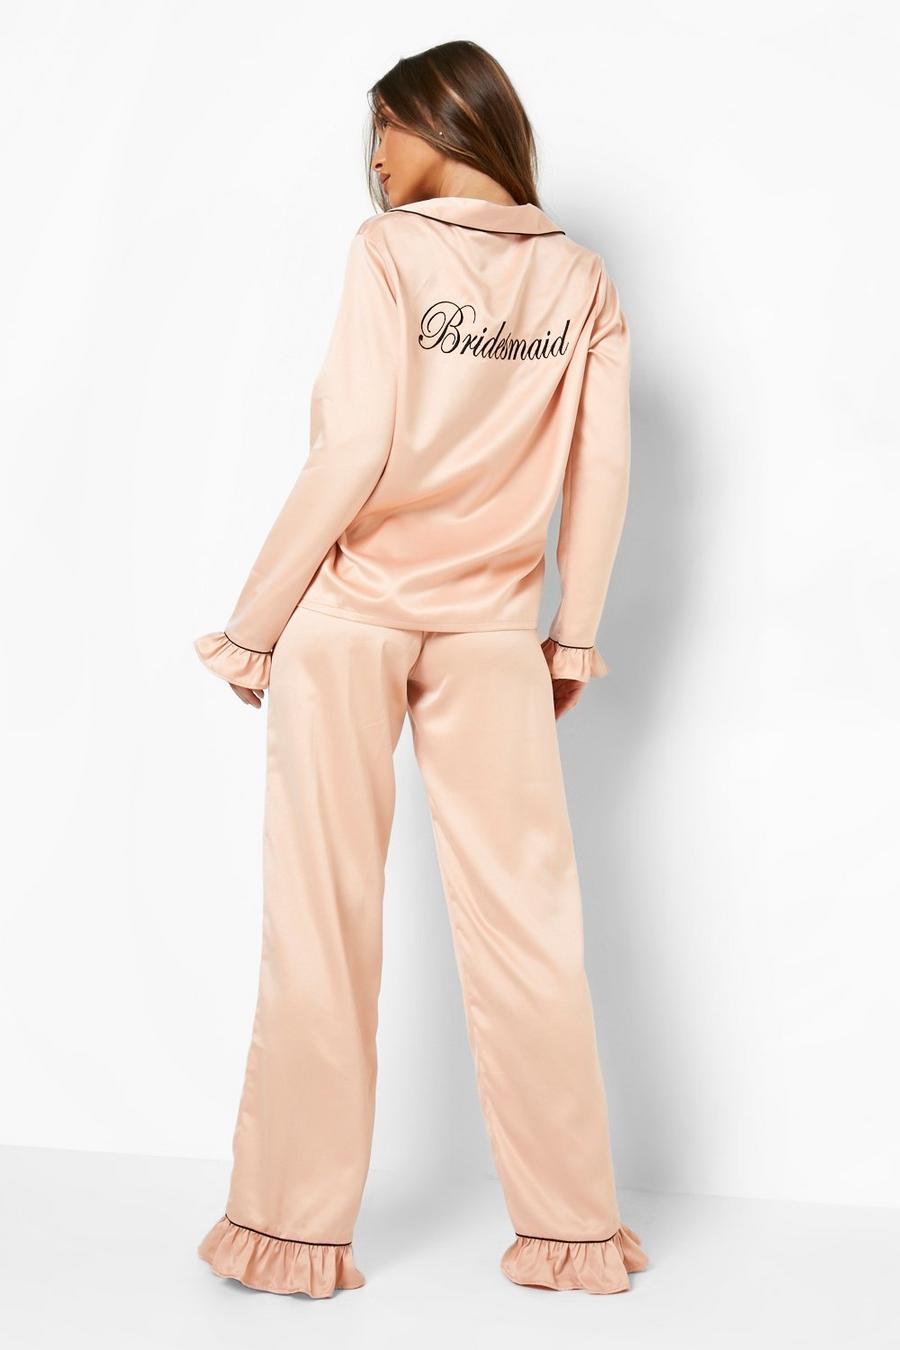 Rose gold metallic Recycled Premium Bridesmaid Embroidery Frill Pants Set